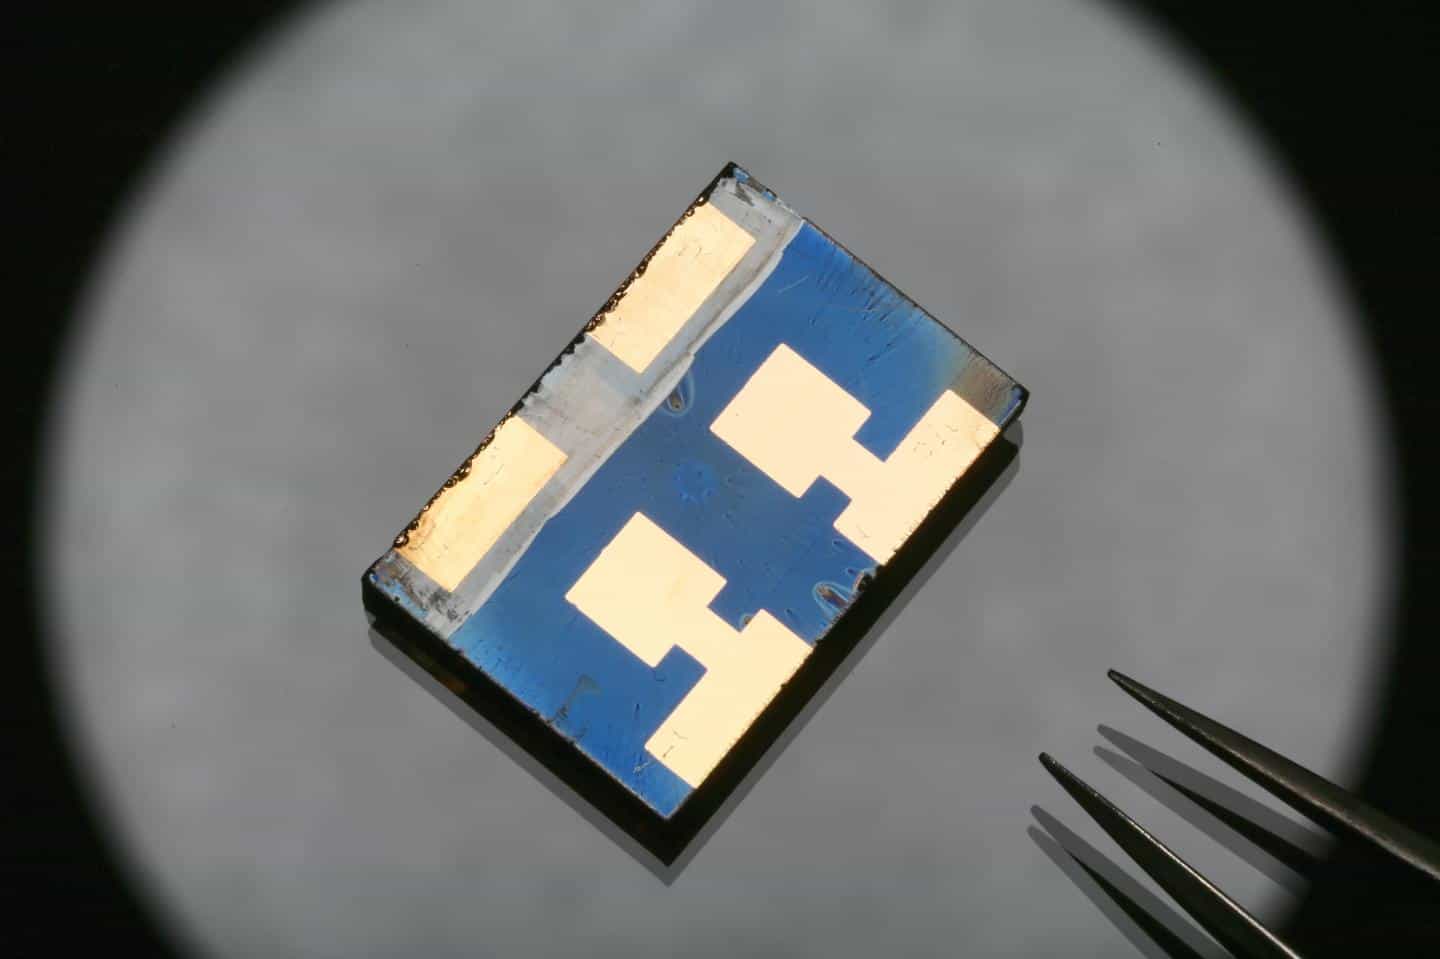 Grätzel's team's new cell is about the size of an SD card.